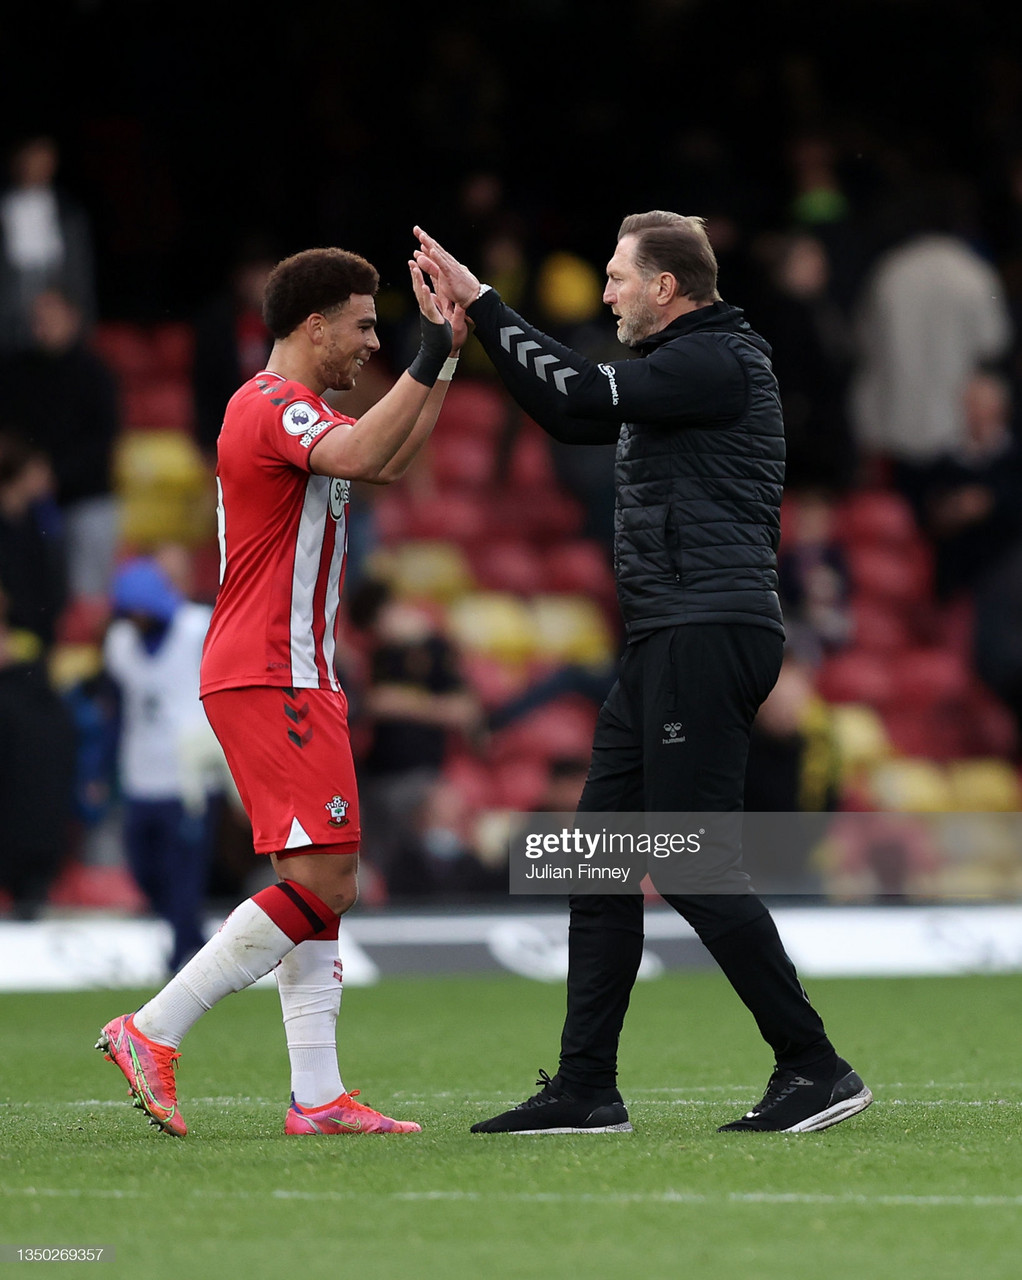 Key quotes from Ralph Hasenhüttl's post-match conference